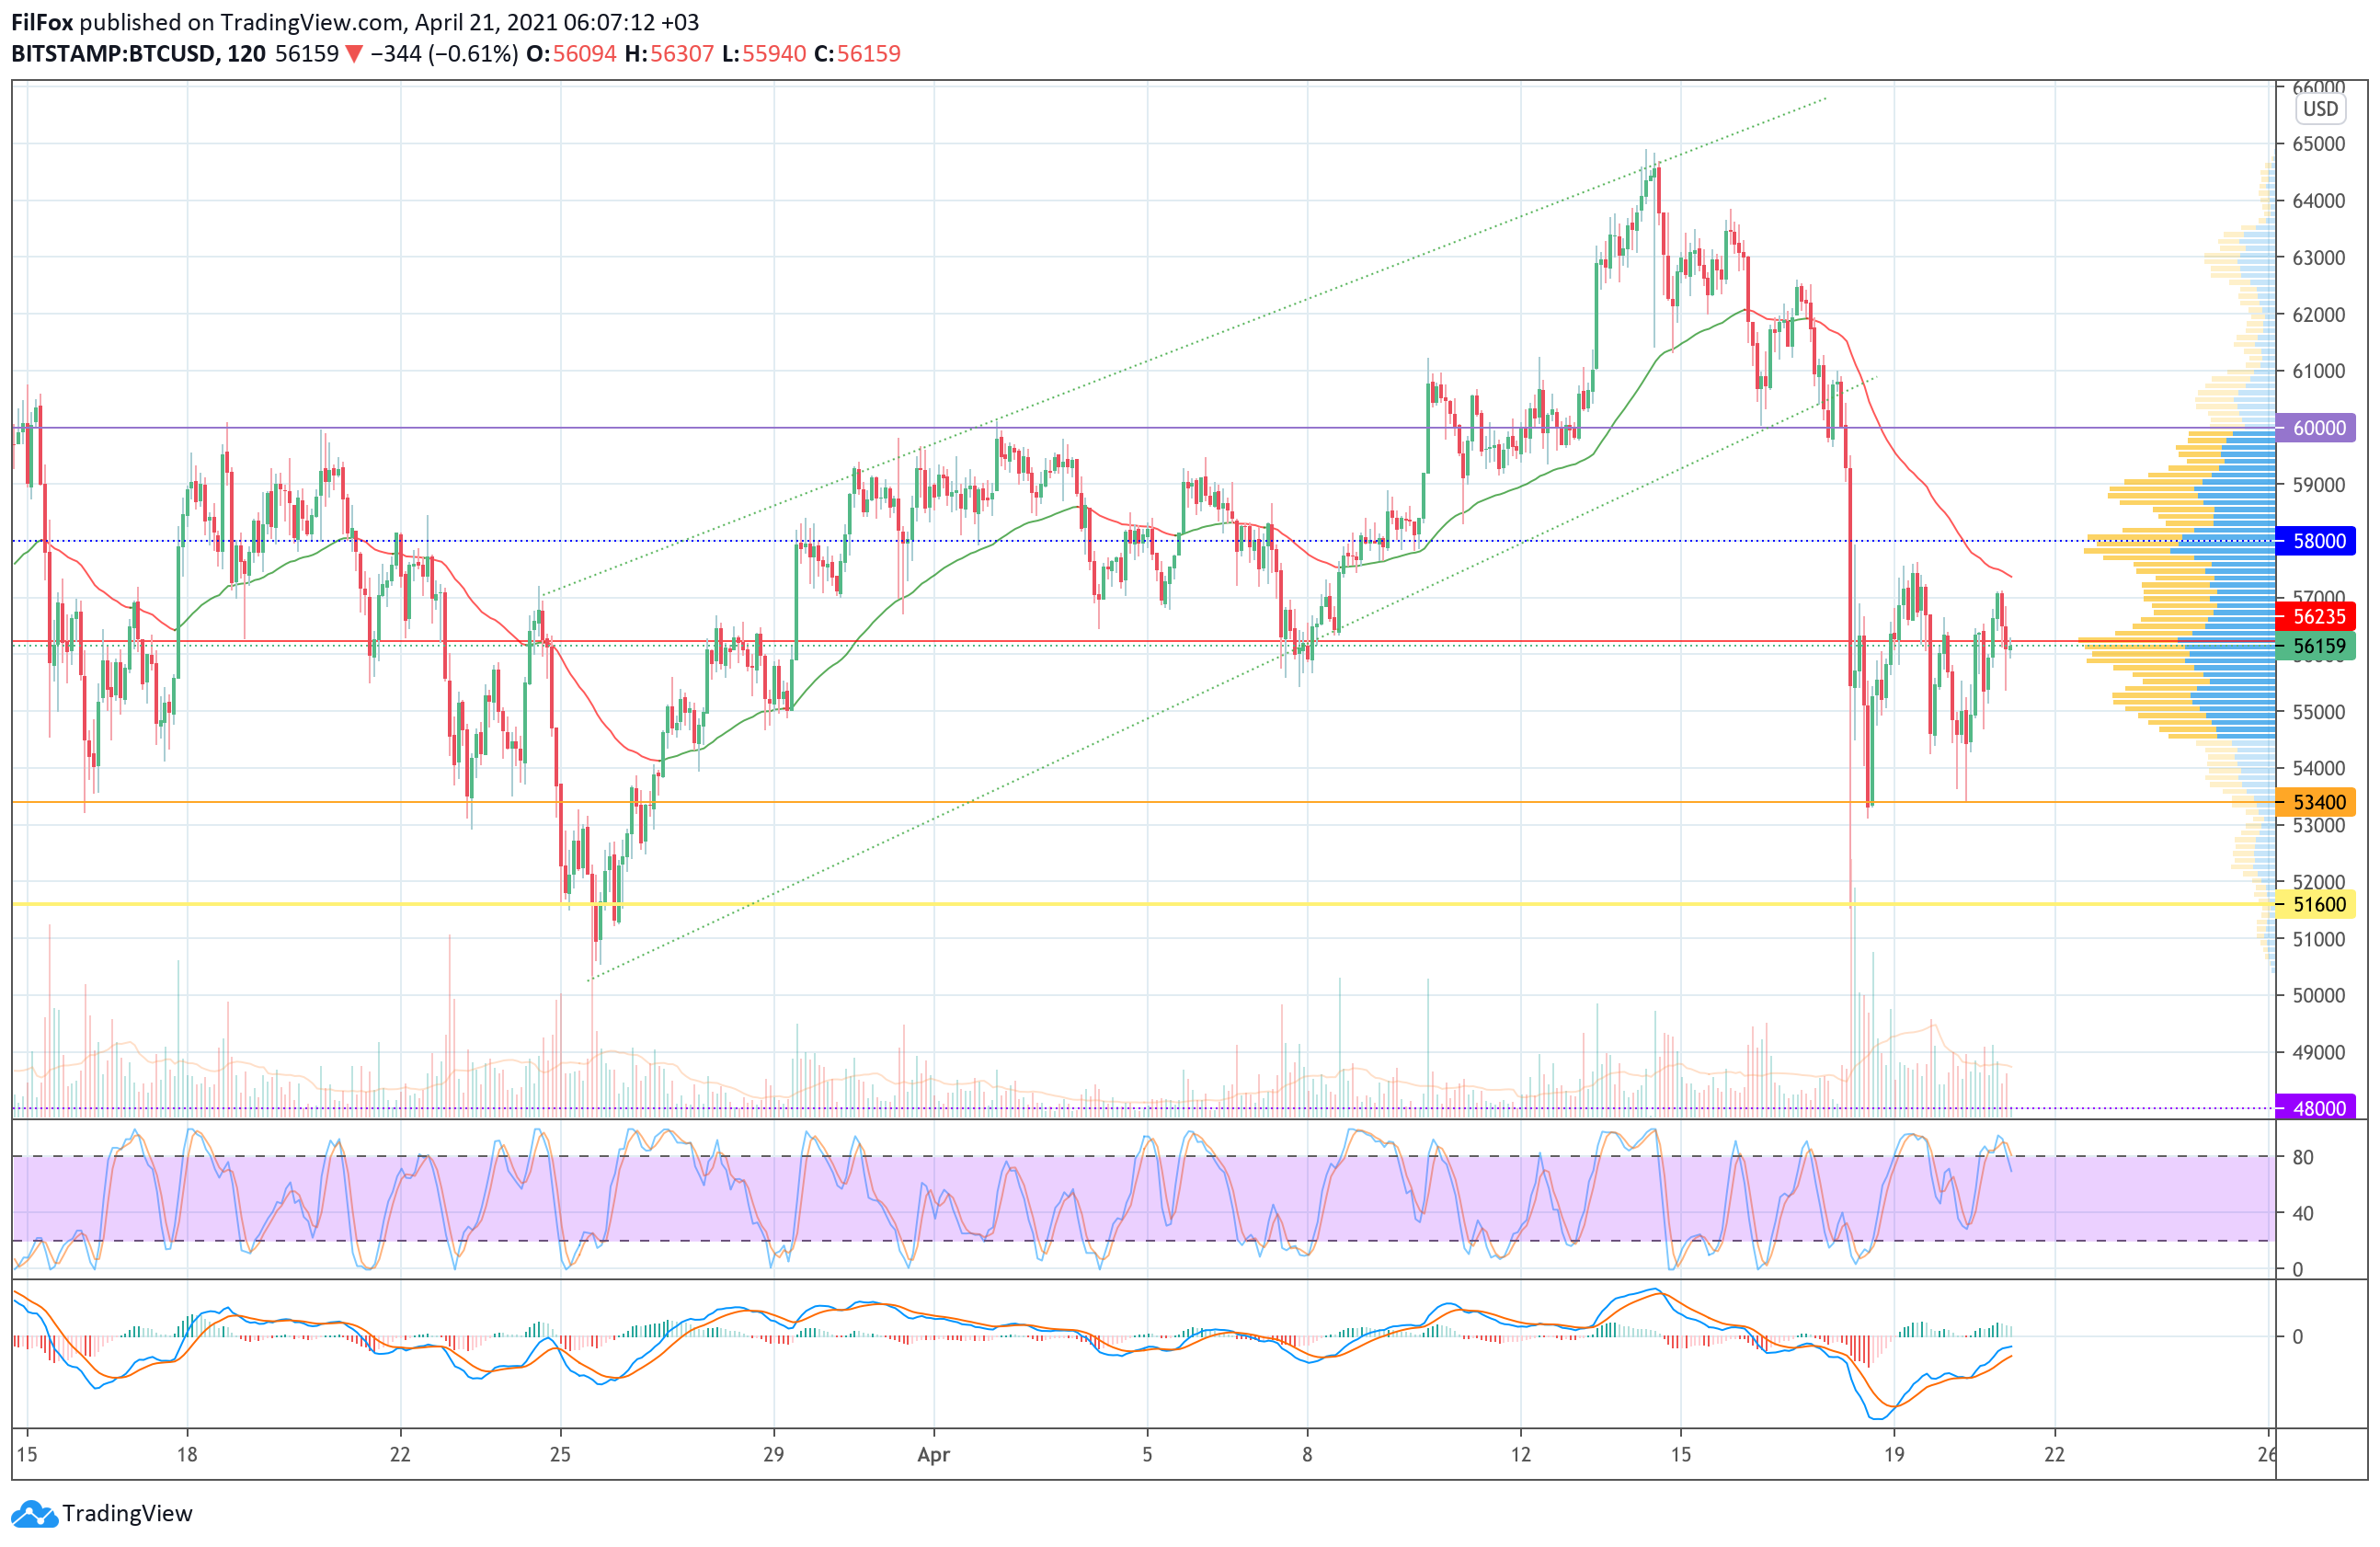 Analysis of the prices of Bitcoin, Ethereum, XRP for 04/21/2021